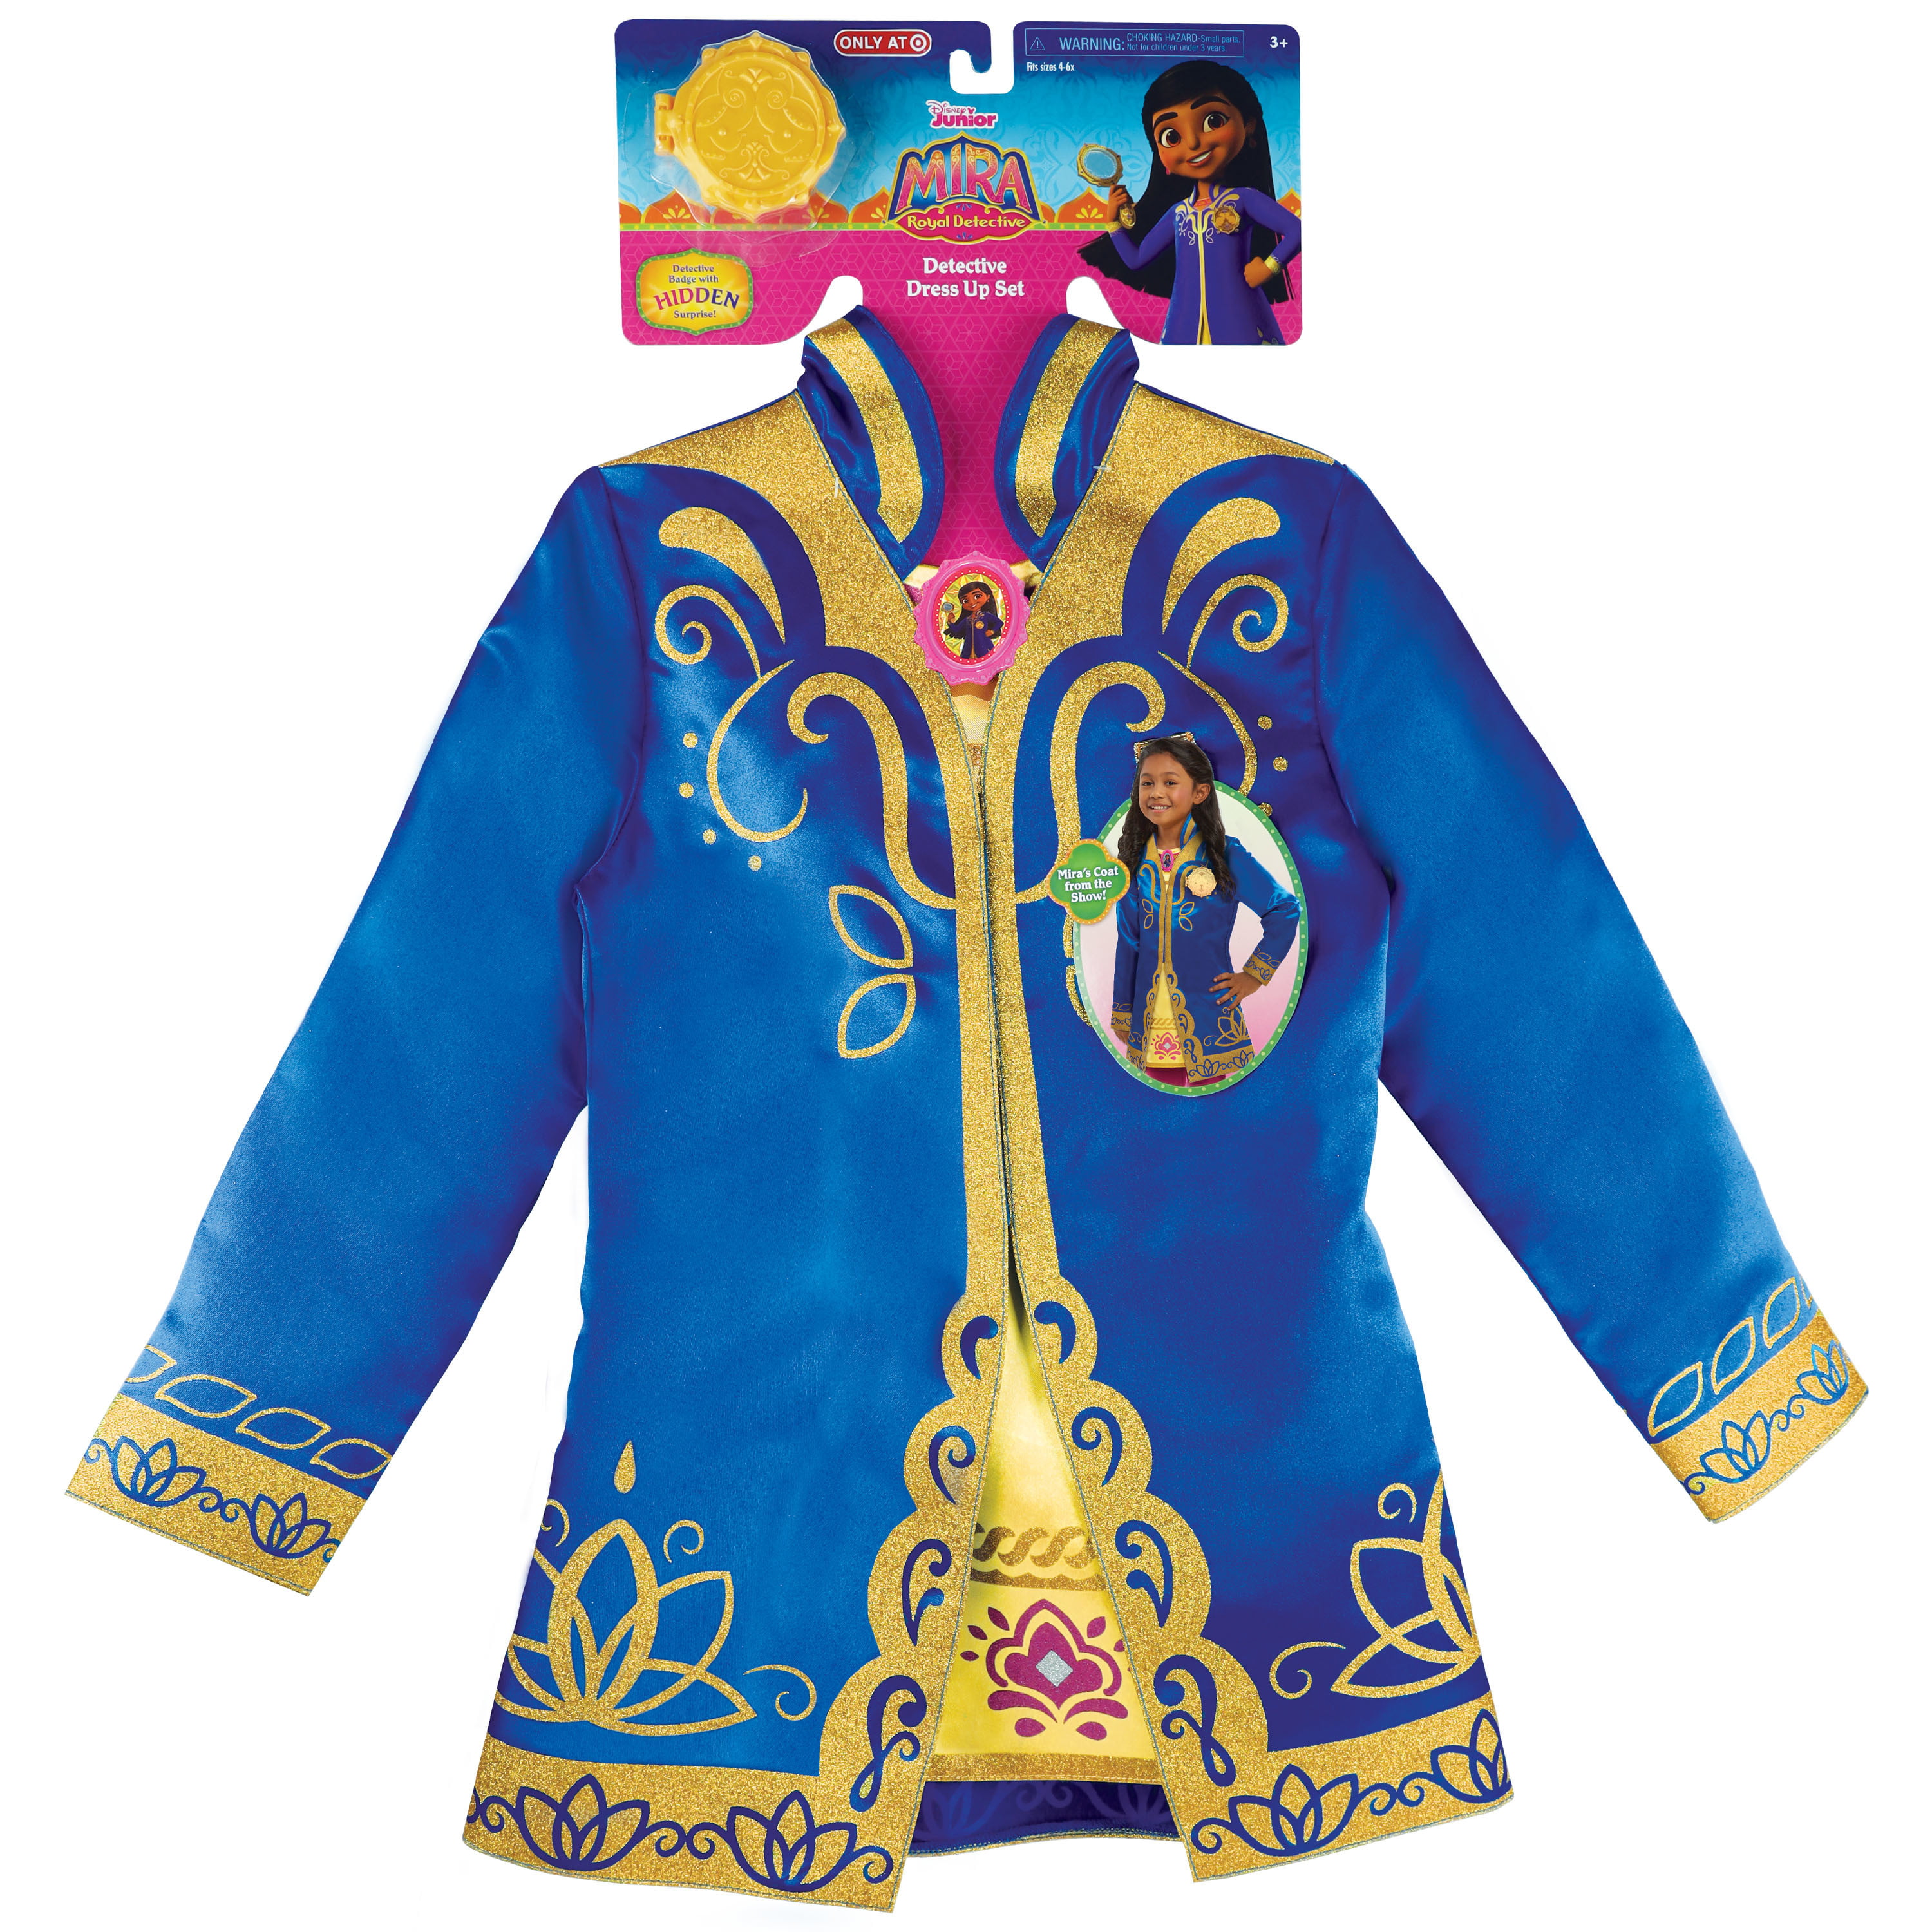 Disney Junior Mira, Royal Detective Mira Detective Dress Up Set, Size 4-6X,  Kids Pretend Play Costume, By Just Play